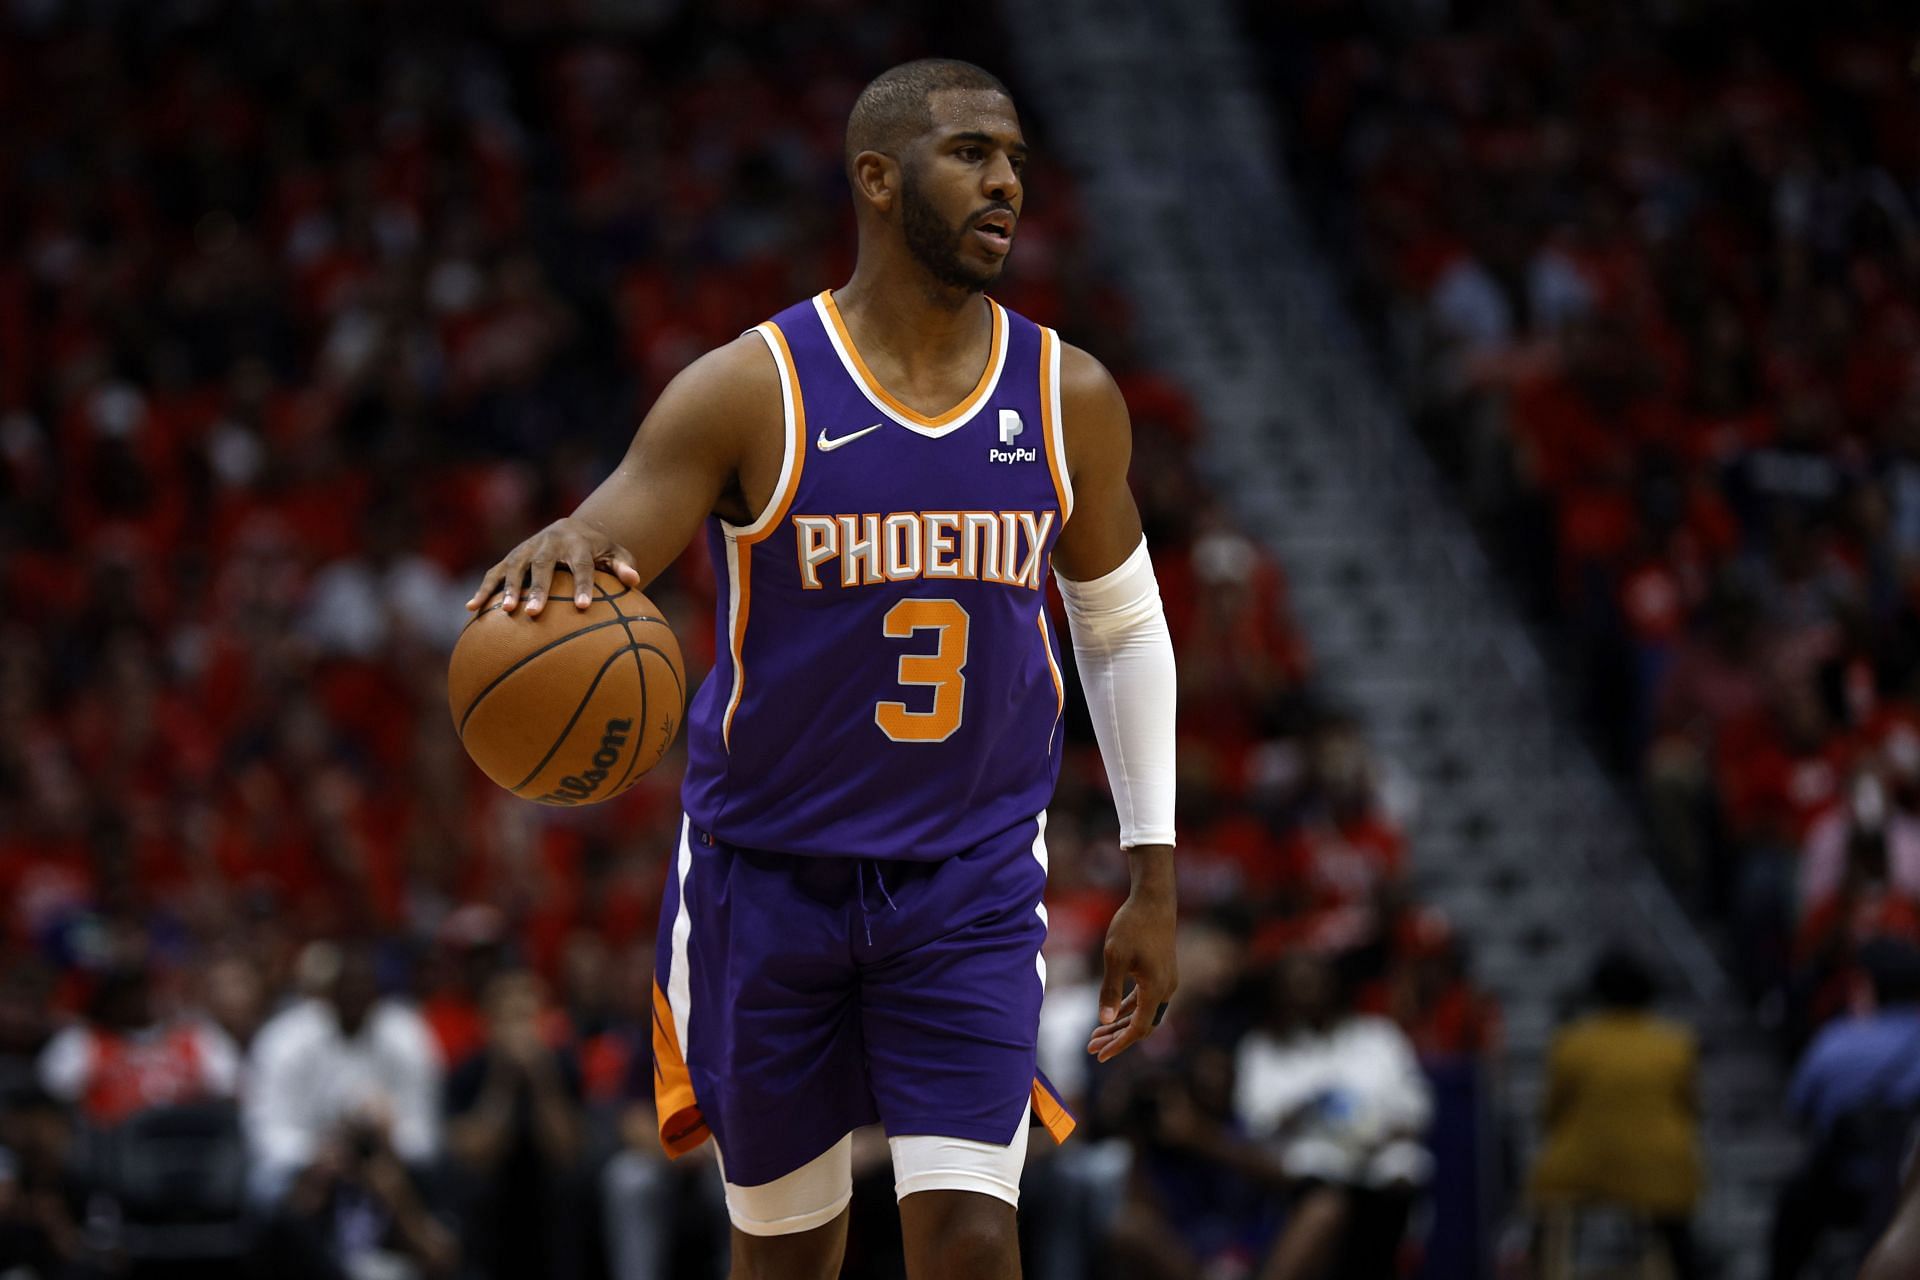 Chris Paul unsure about hand, but sure Suns can manage if he's out